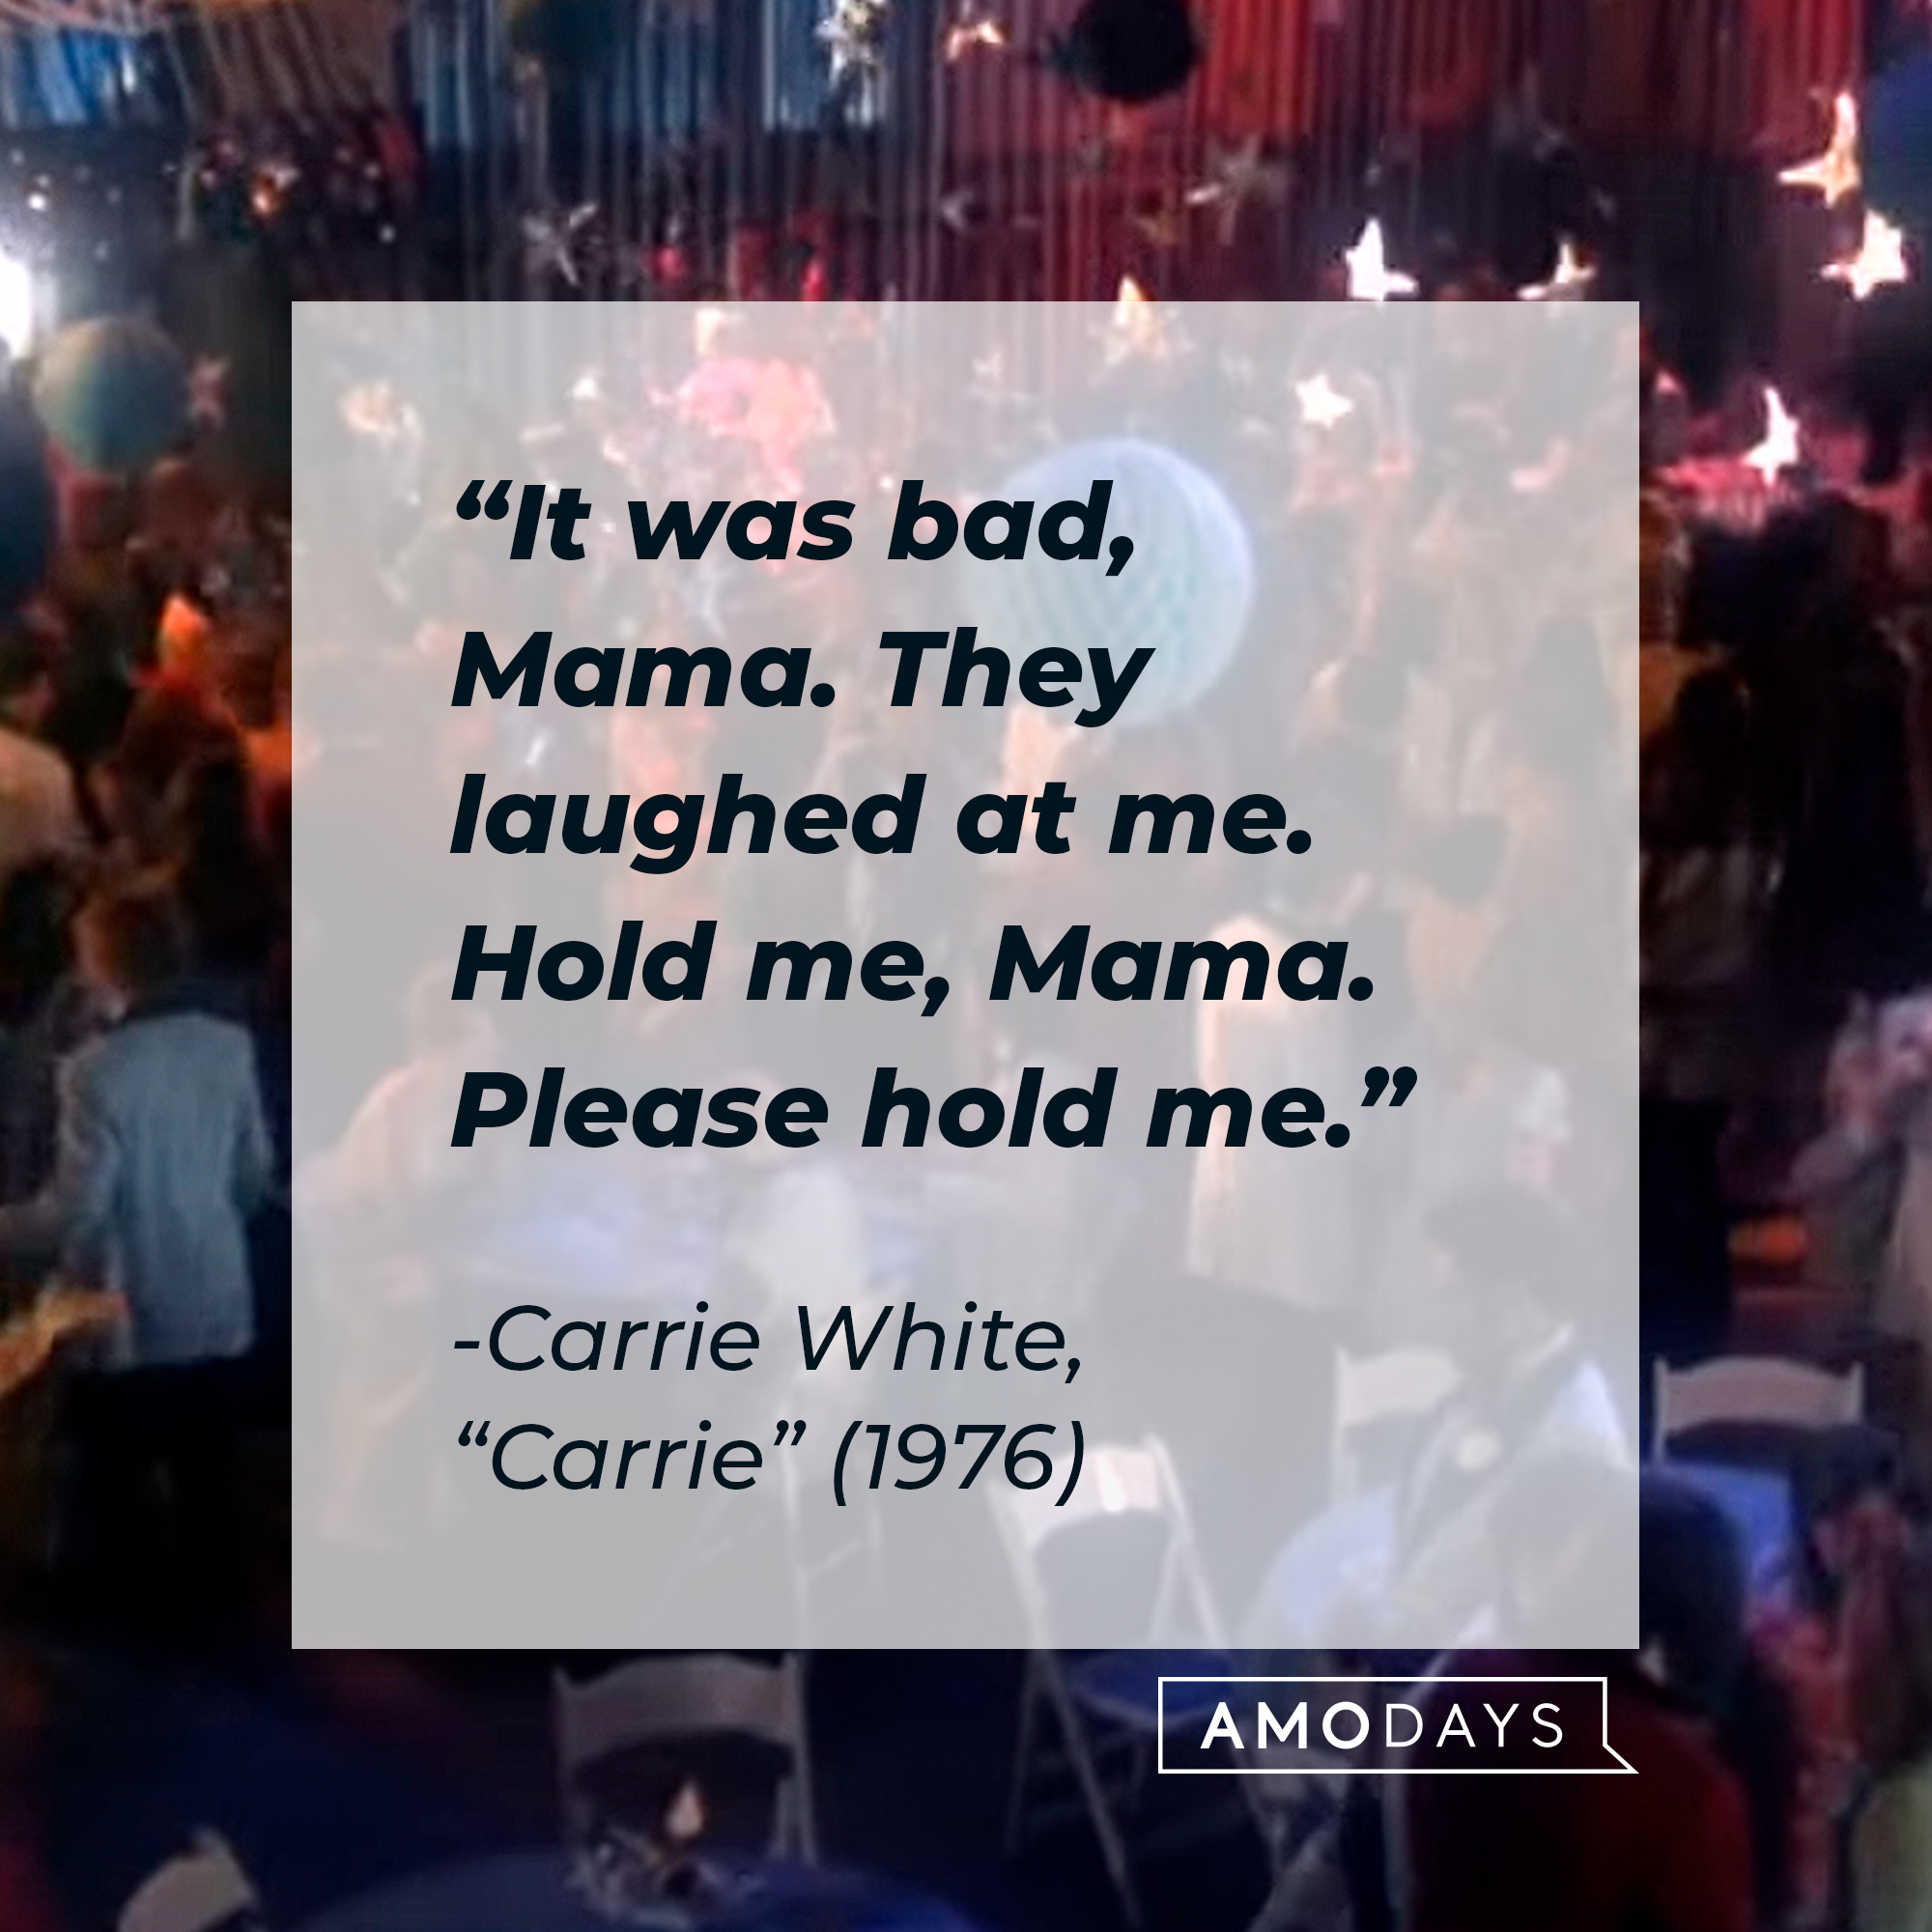 Carrie White's quote: "It was bad, Mama. They laughed at me. Hold me, Mama. Please hold me.” | Source: youtube.com/MGMStudios